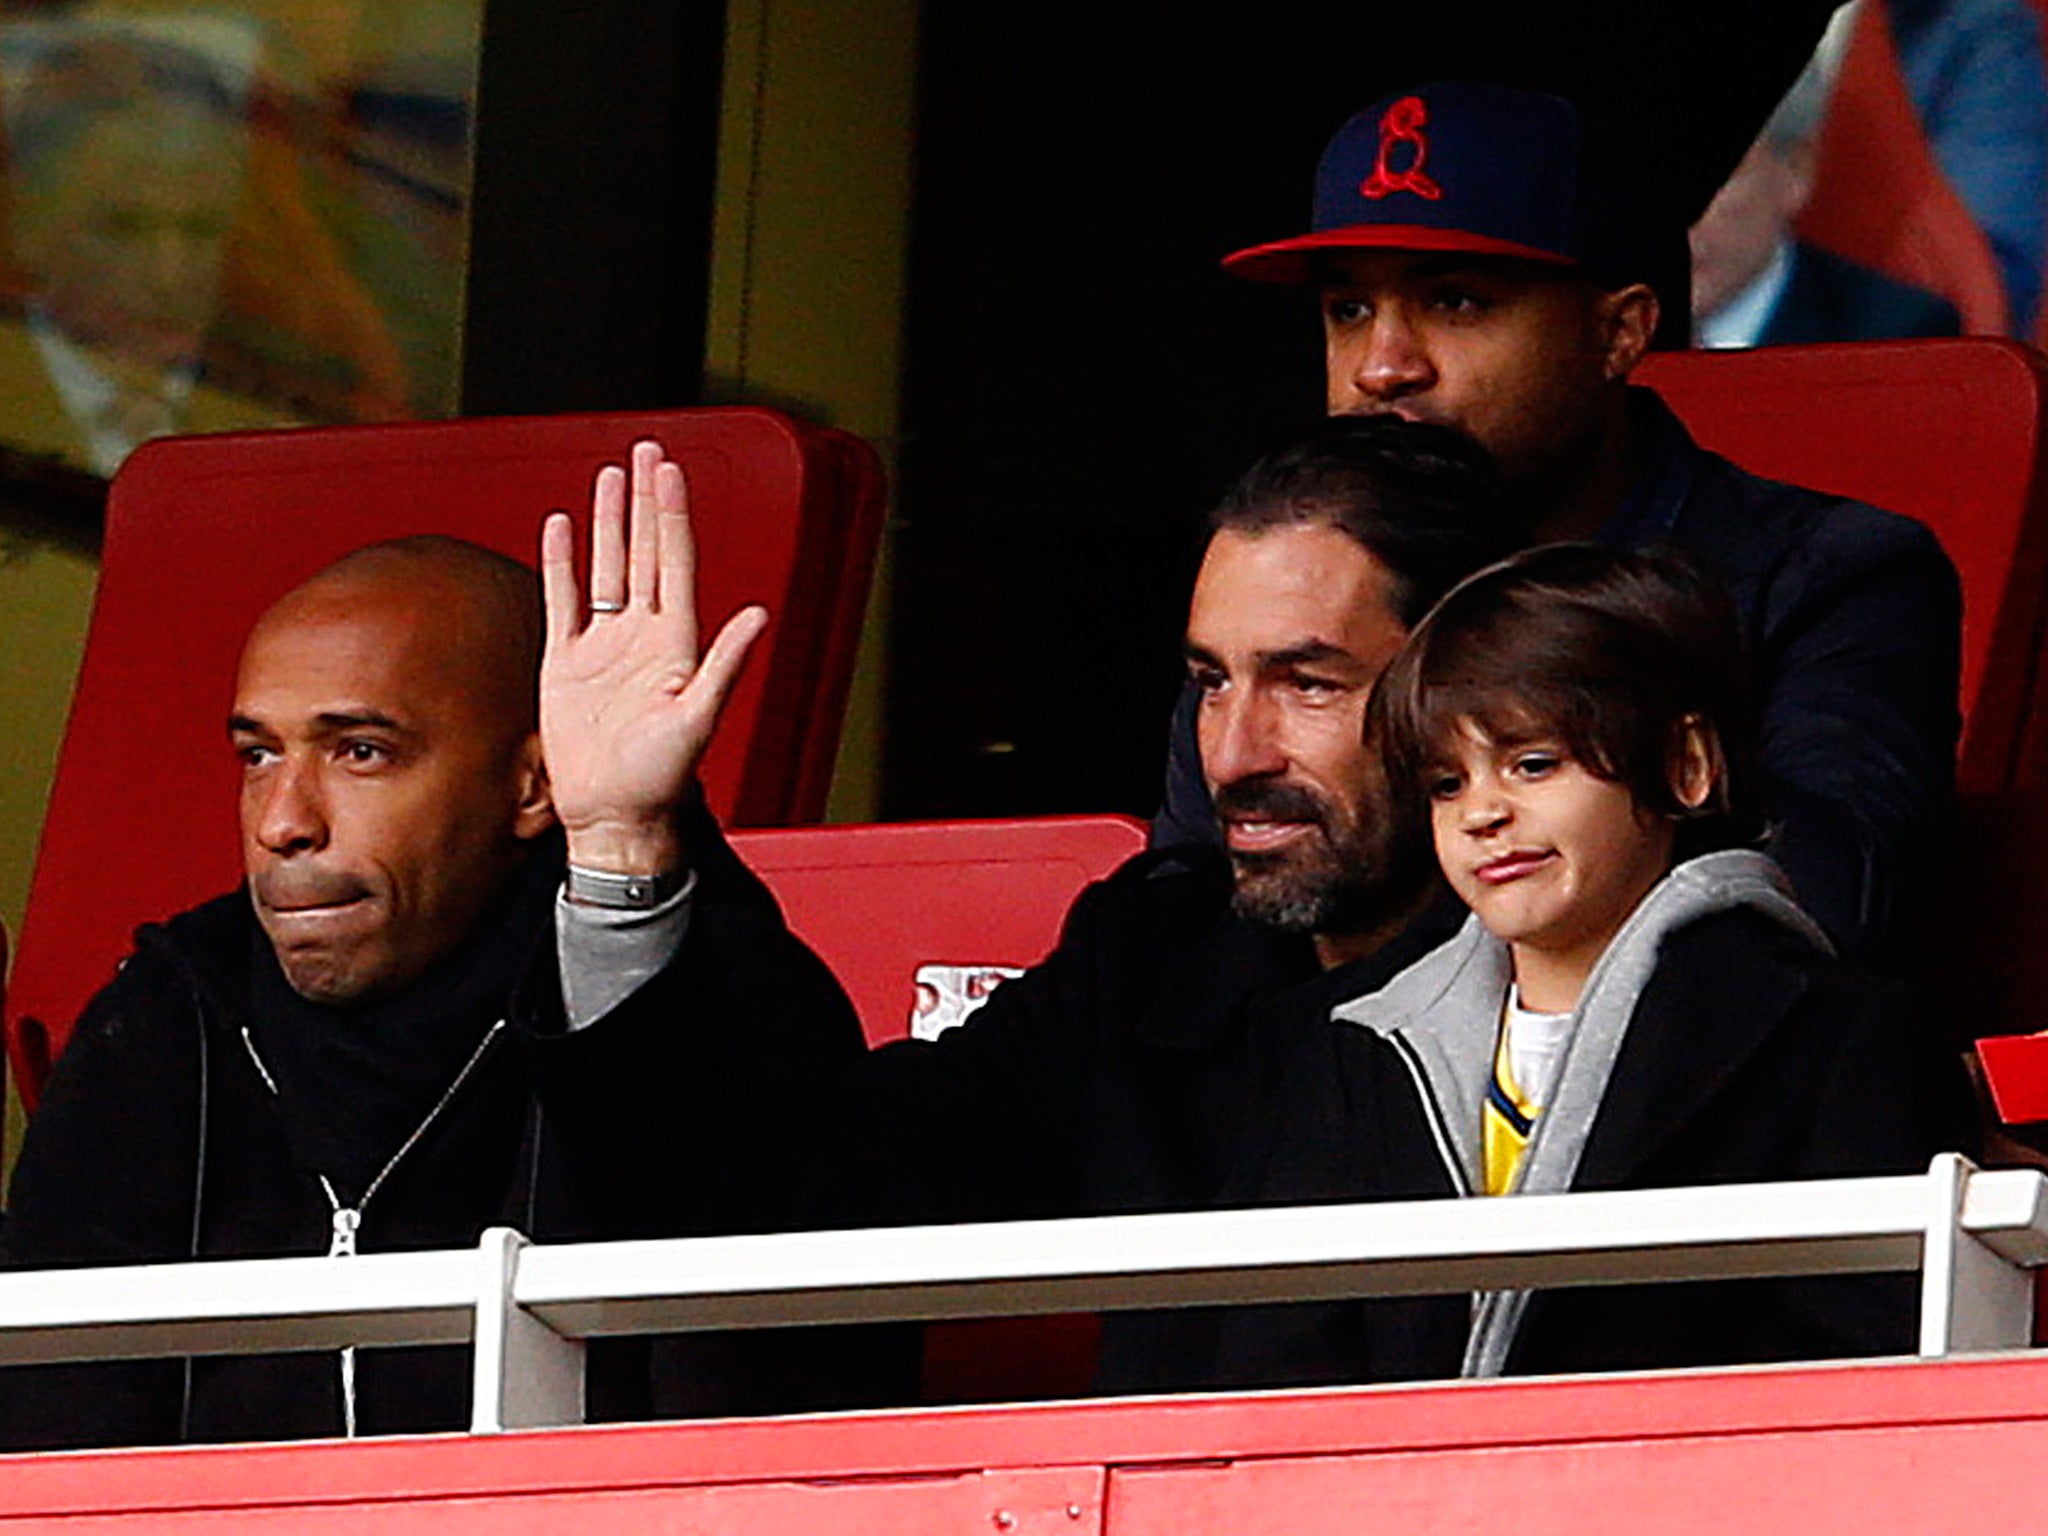 Robert Pires watches Arsenal with his son Theo and fellow ex-Gunners legend Thierry Henry